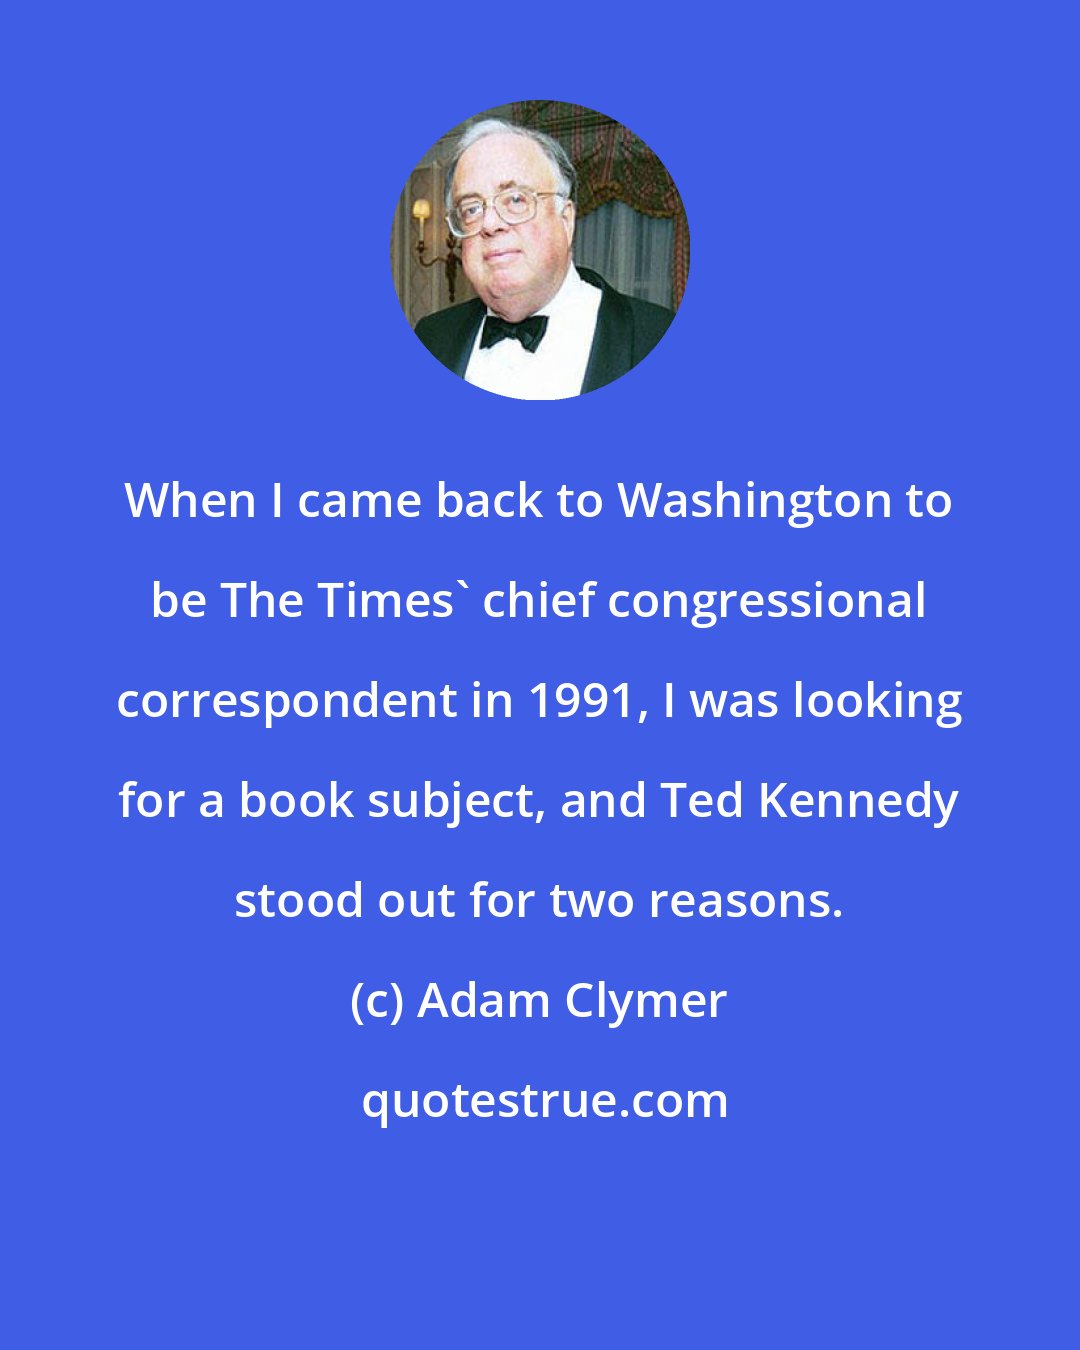 Adam Clymer: When I came back to Washington to be The Times' chief congressional correspondent in 1991, I was looking for a book subject, and Ted Kennedy stood out for two reasons.